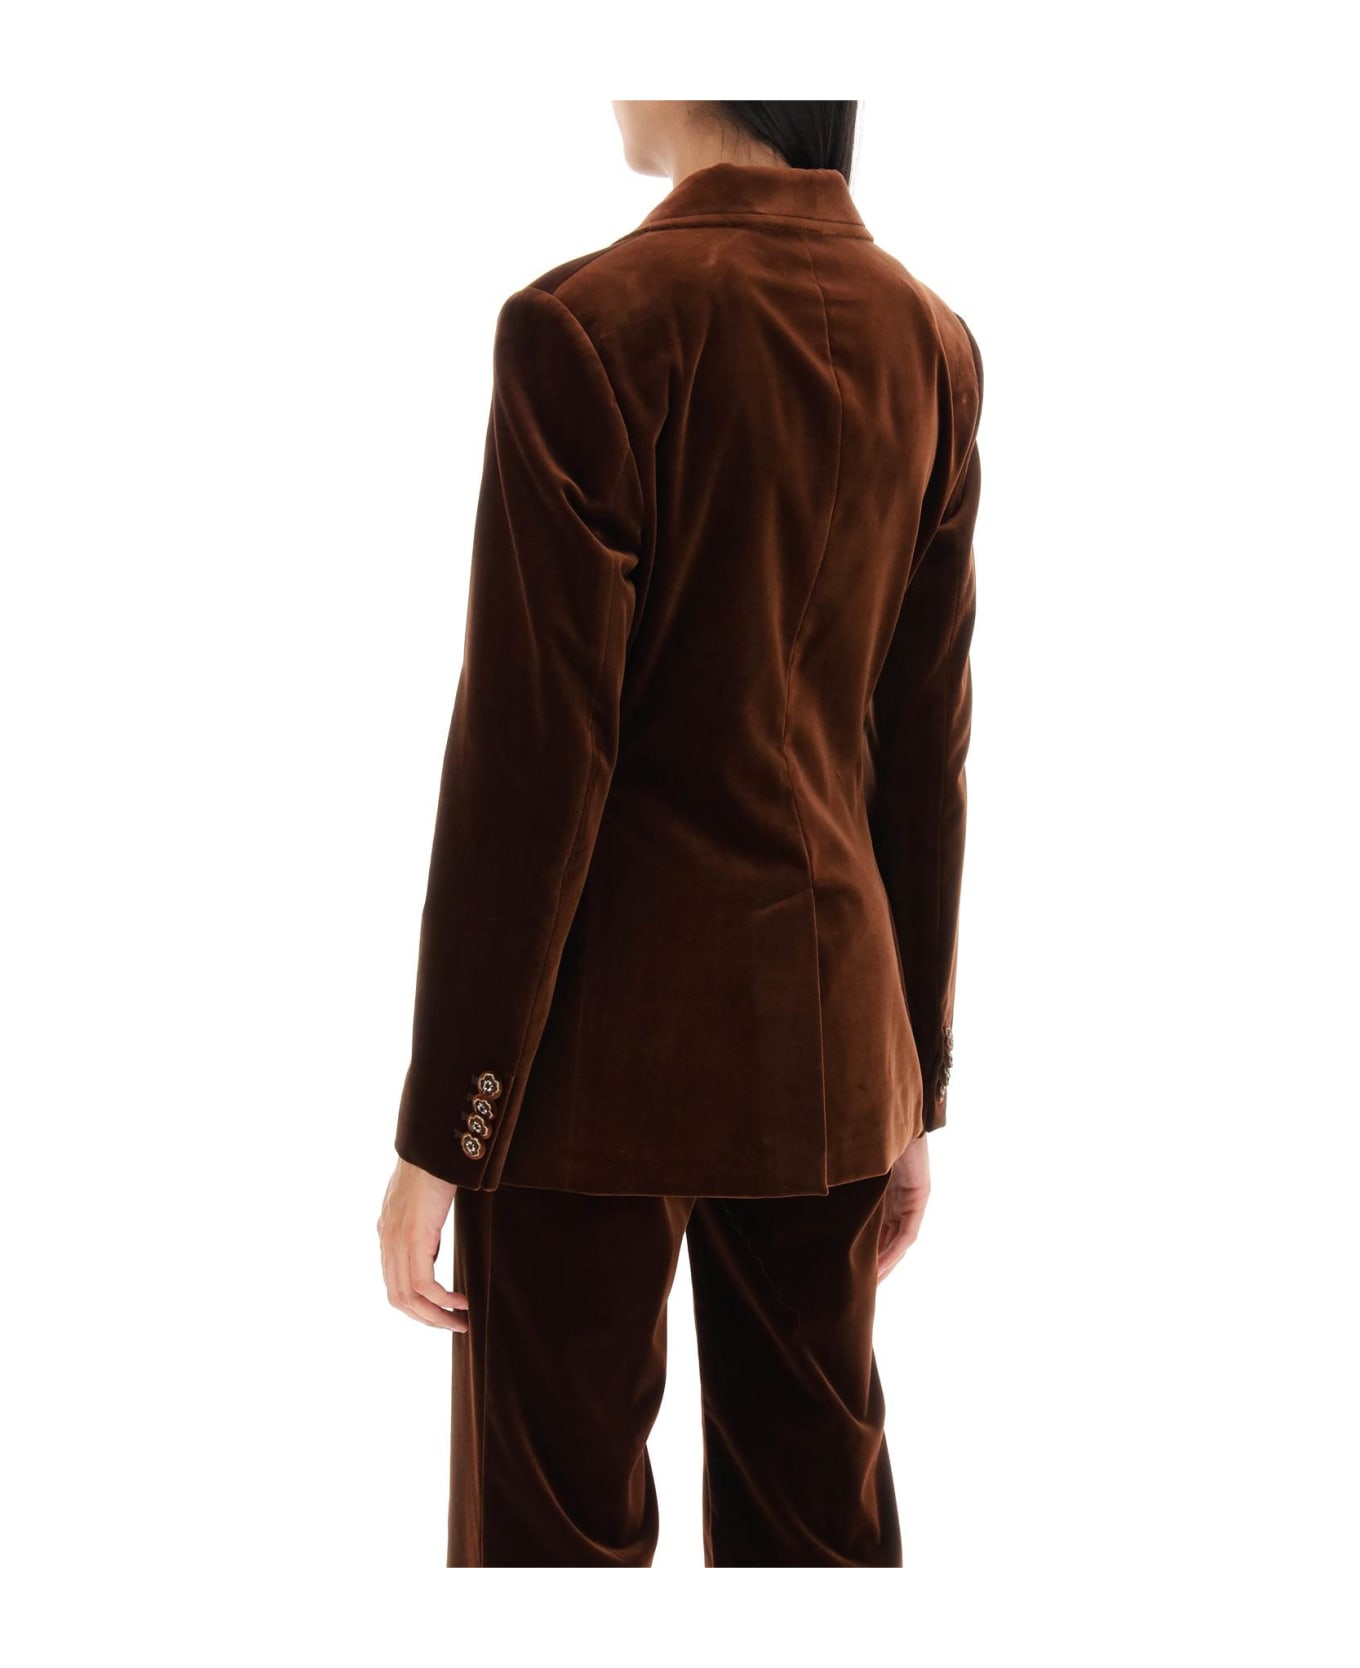 Etro Double-breasted Jacket - BROWN (Brown)